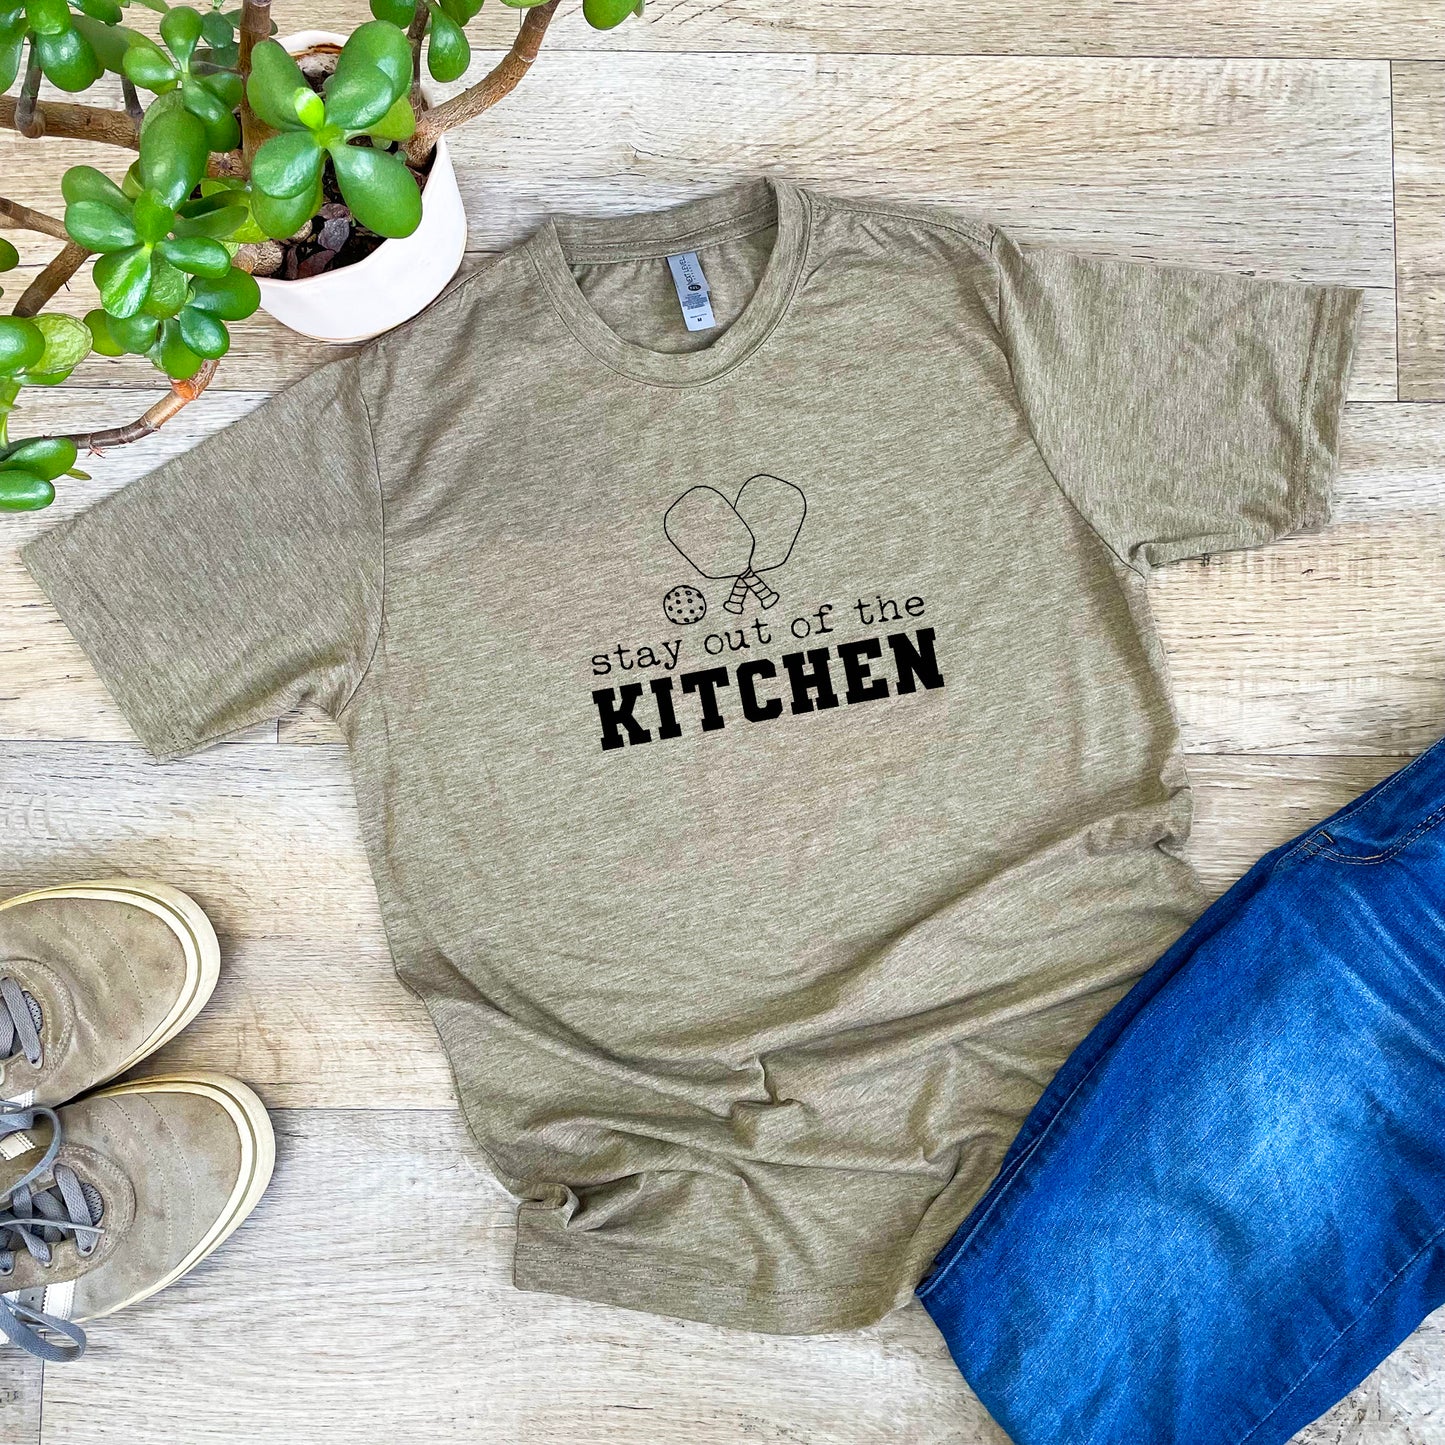 a t - shirt that says stay out of the kitchen next to a potted